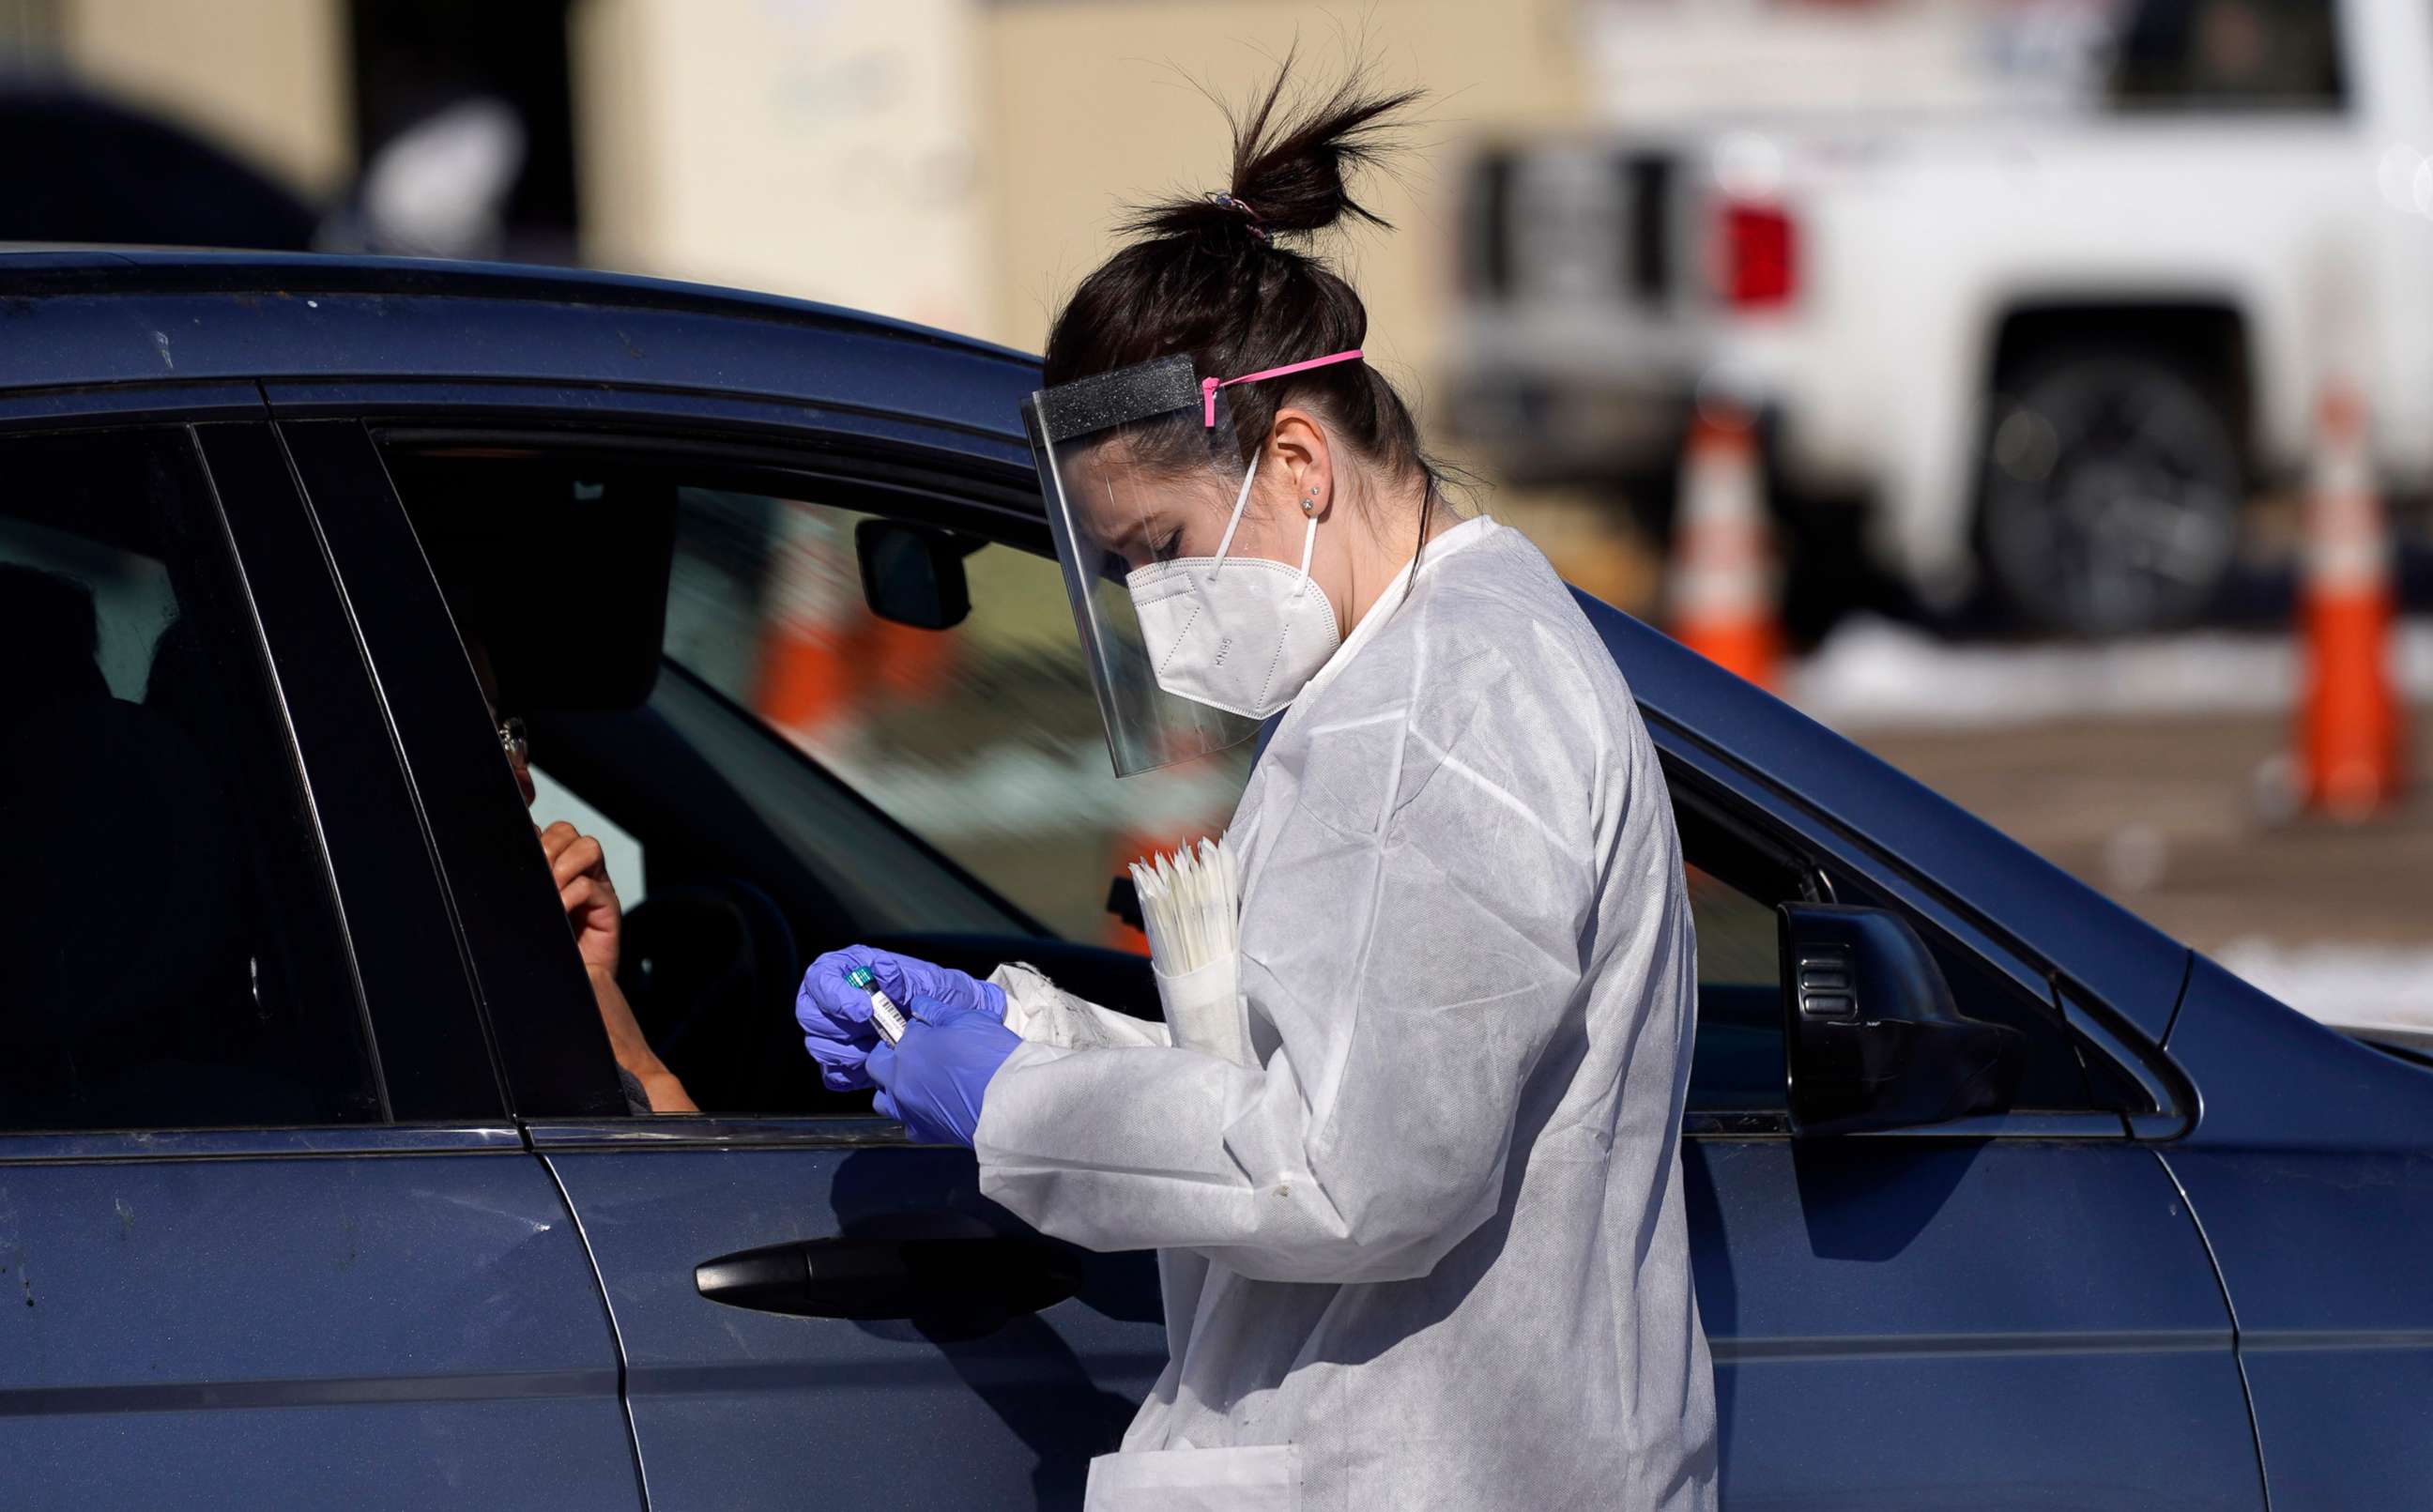 PHOTO: A tester prepares to administer a swab test at a drive-in COVID-19 testing site, Oct. 27, 2020, in Federal Heights, Colo.